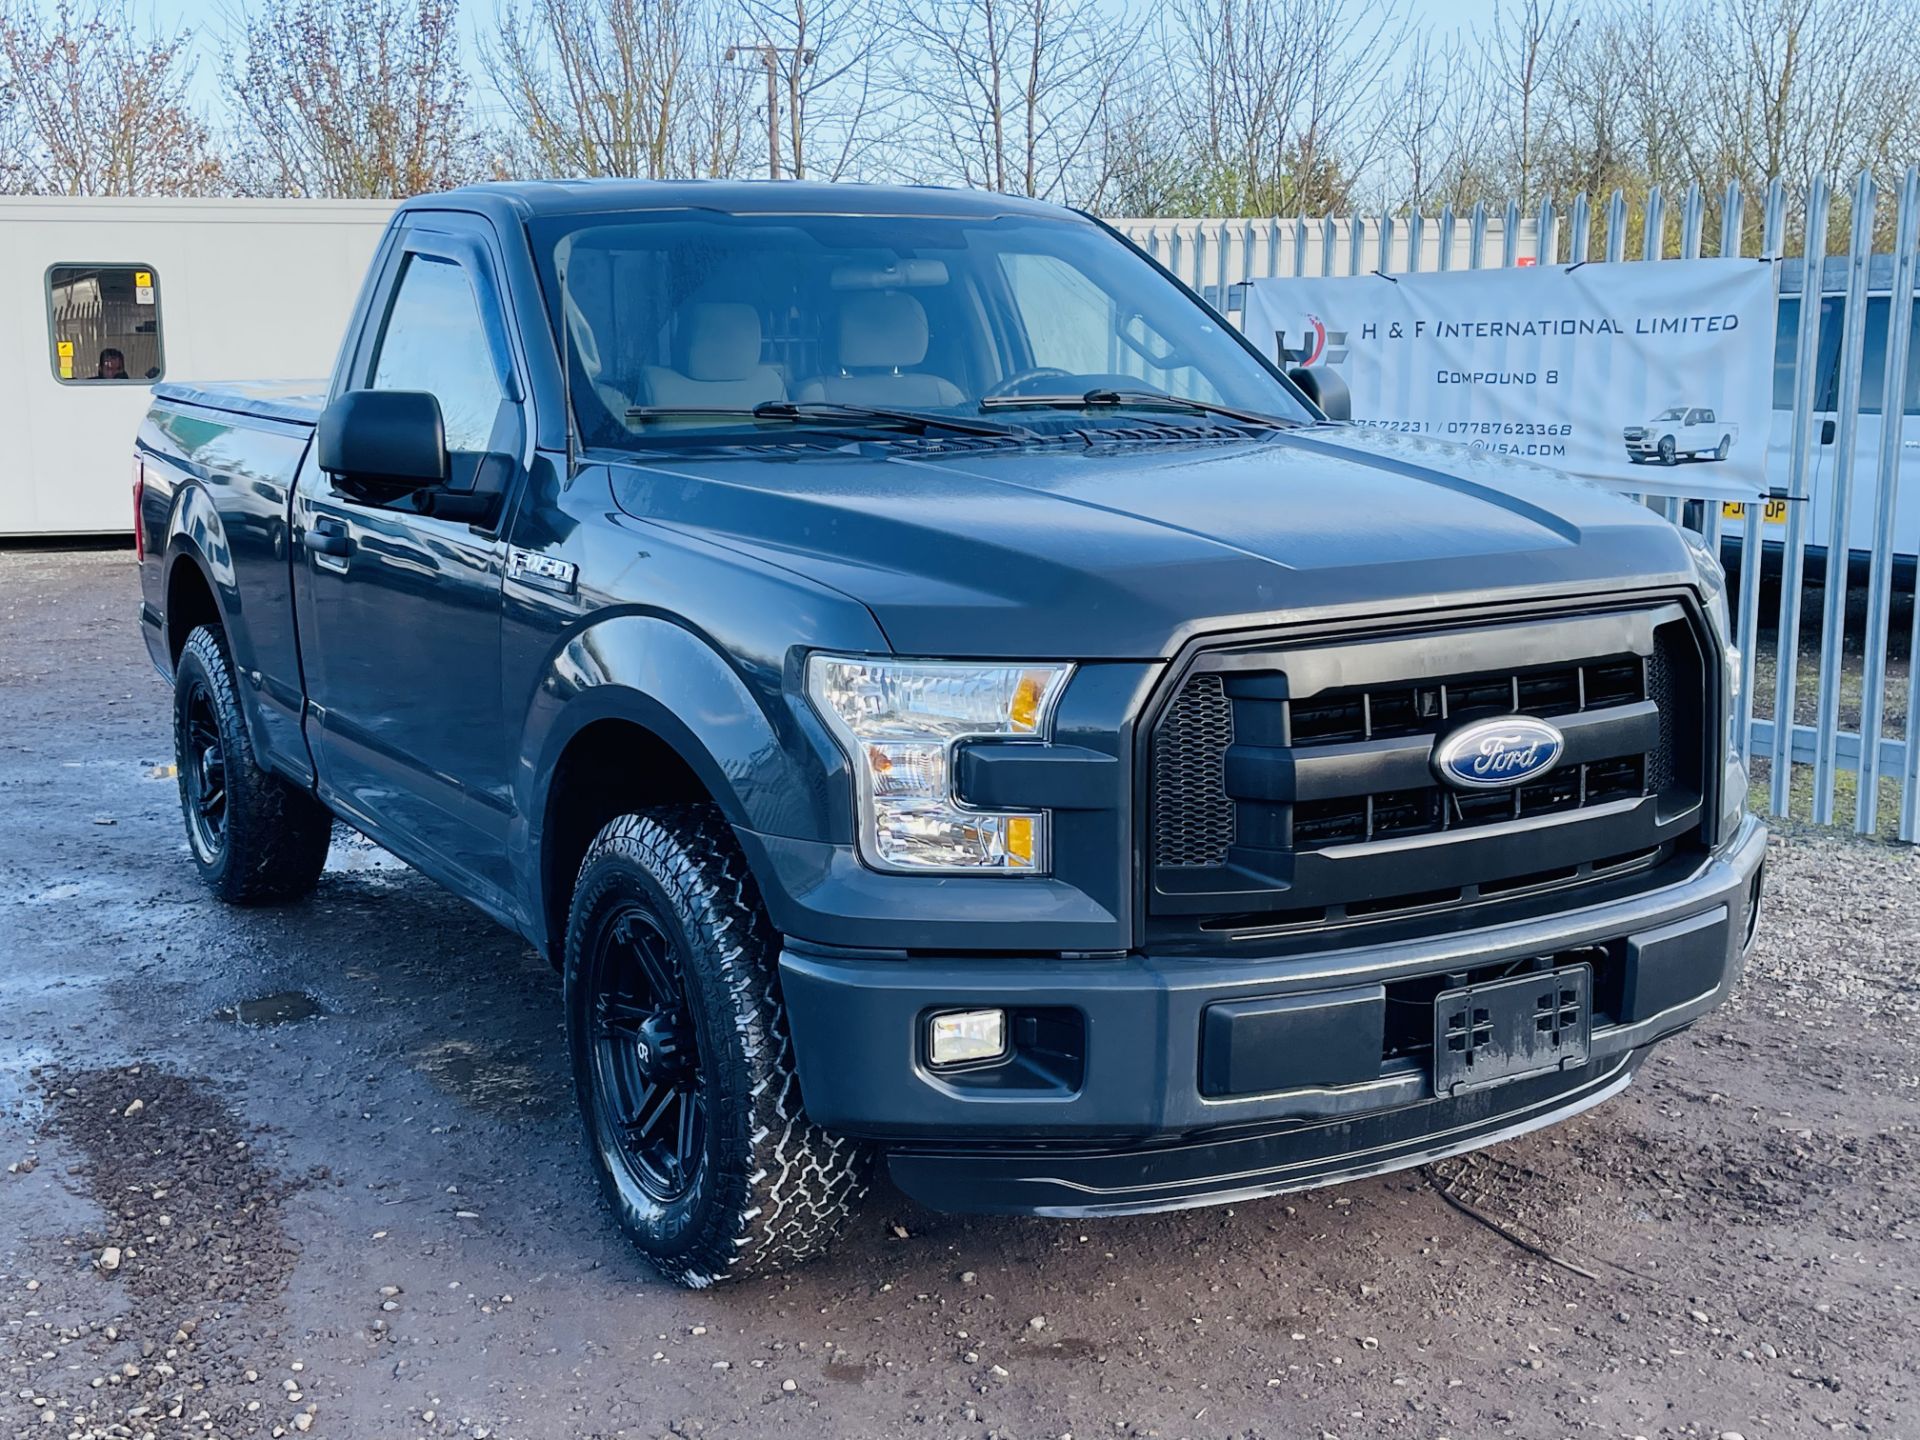 Ford F-150 3.5L V6 XL *Sport Edition '2016 year' Single Cab - Short Bed **ULTRA RARE** - Image 2 of 35